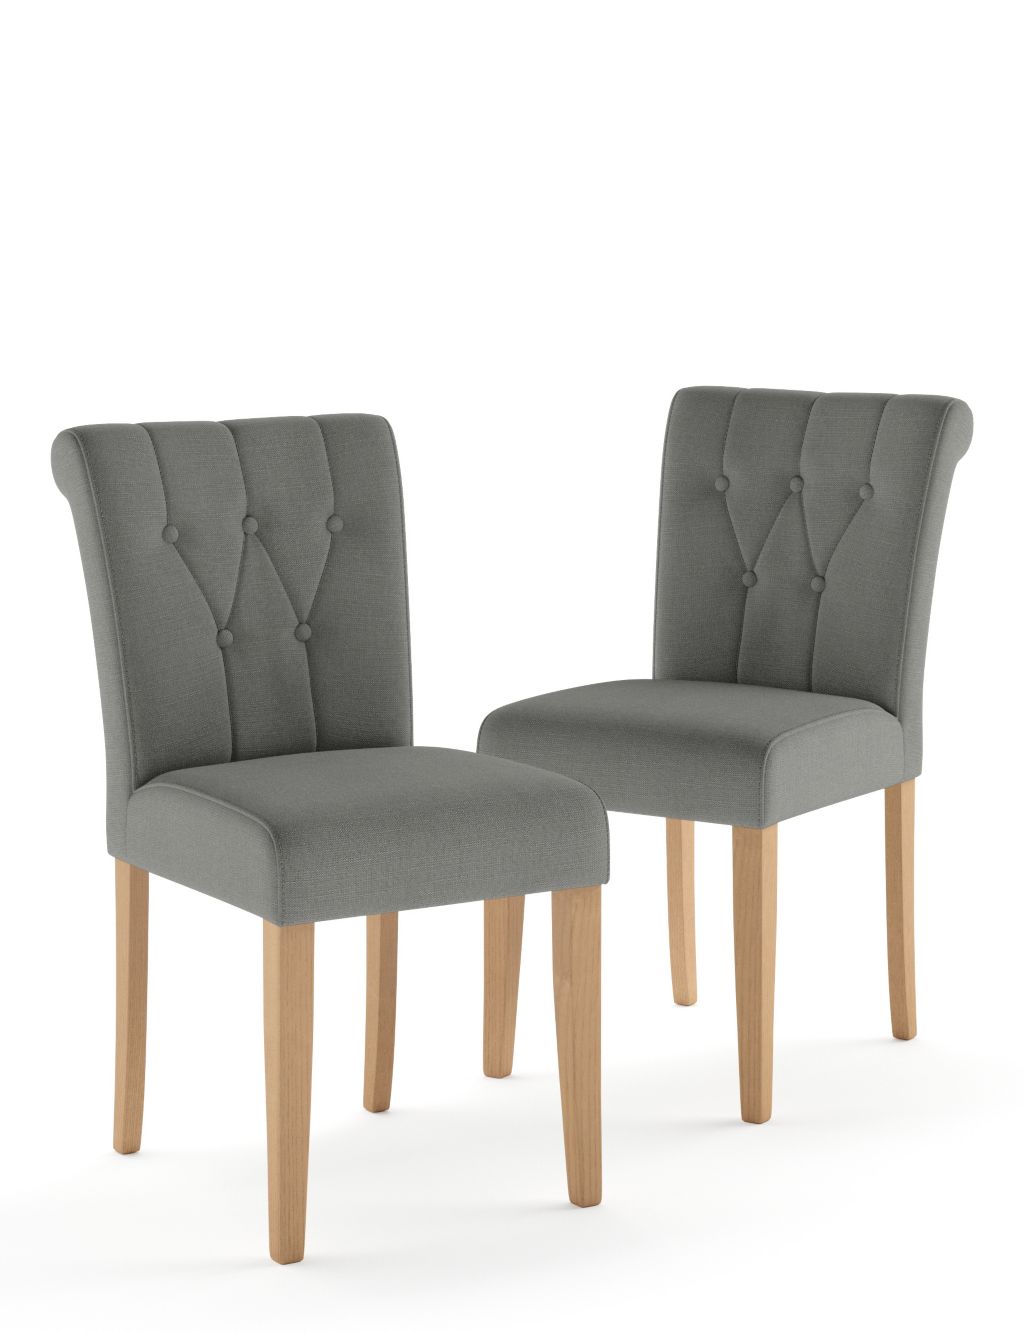 Set of 2 Langley Dining Chairs image 2